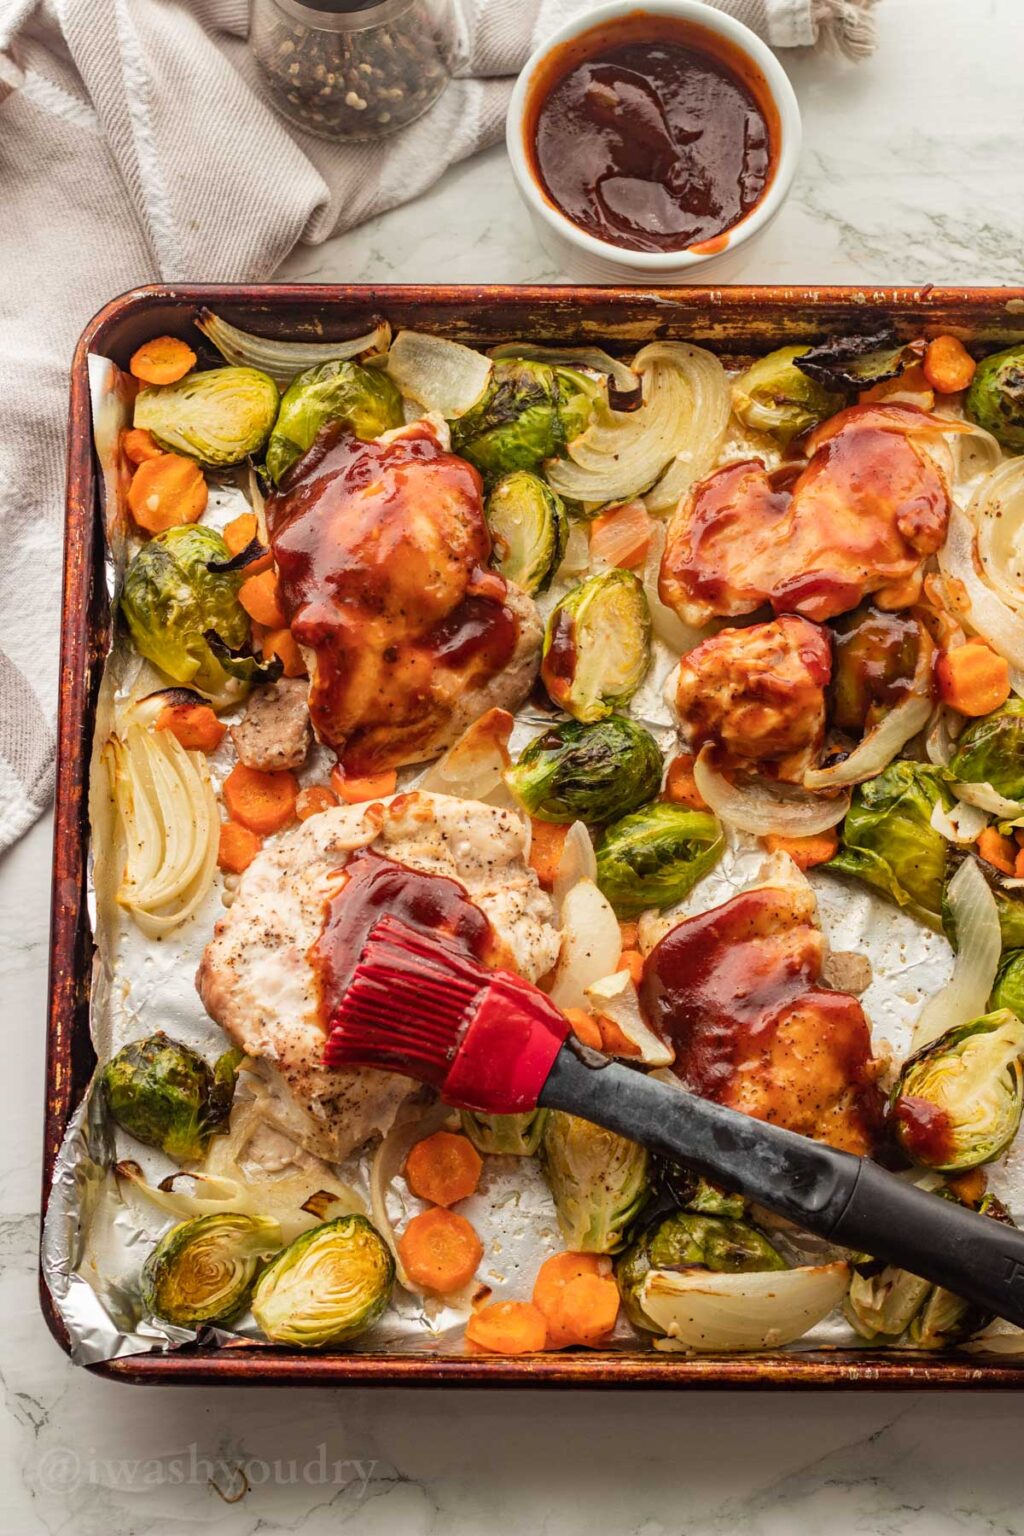 BBQ Roasted Chicken Thighs with Vegetables - I Wash You Dry